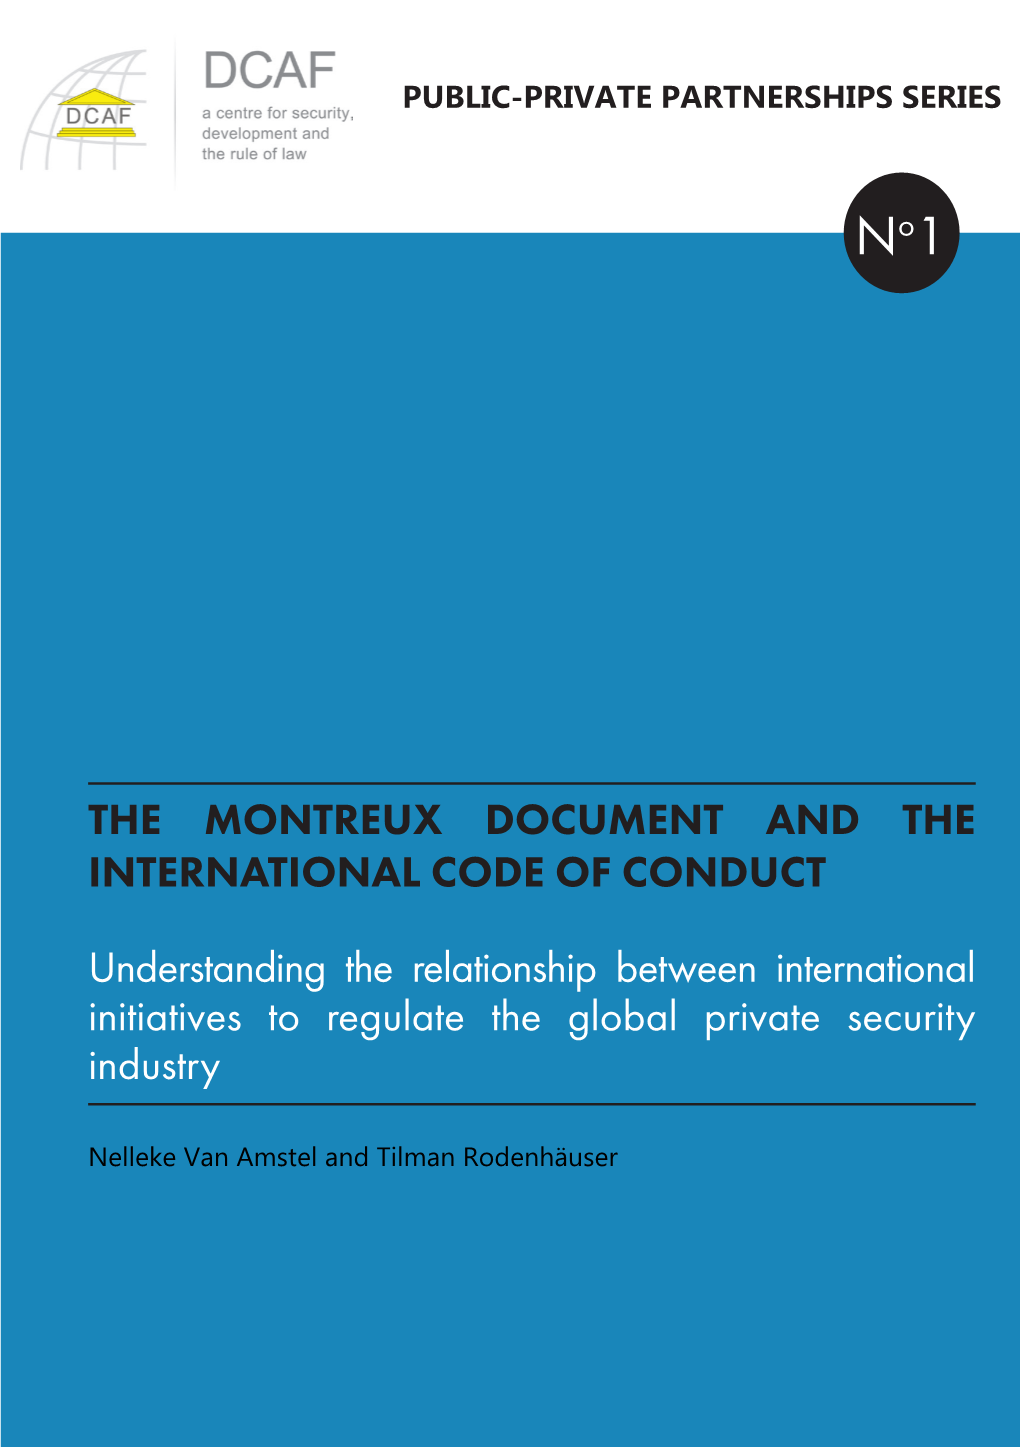 The Montreux Document and the International Code of Conduct